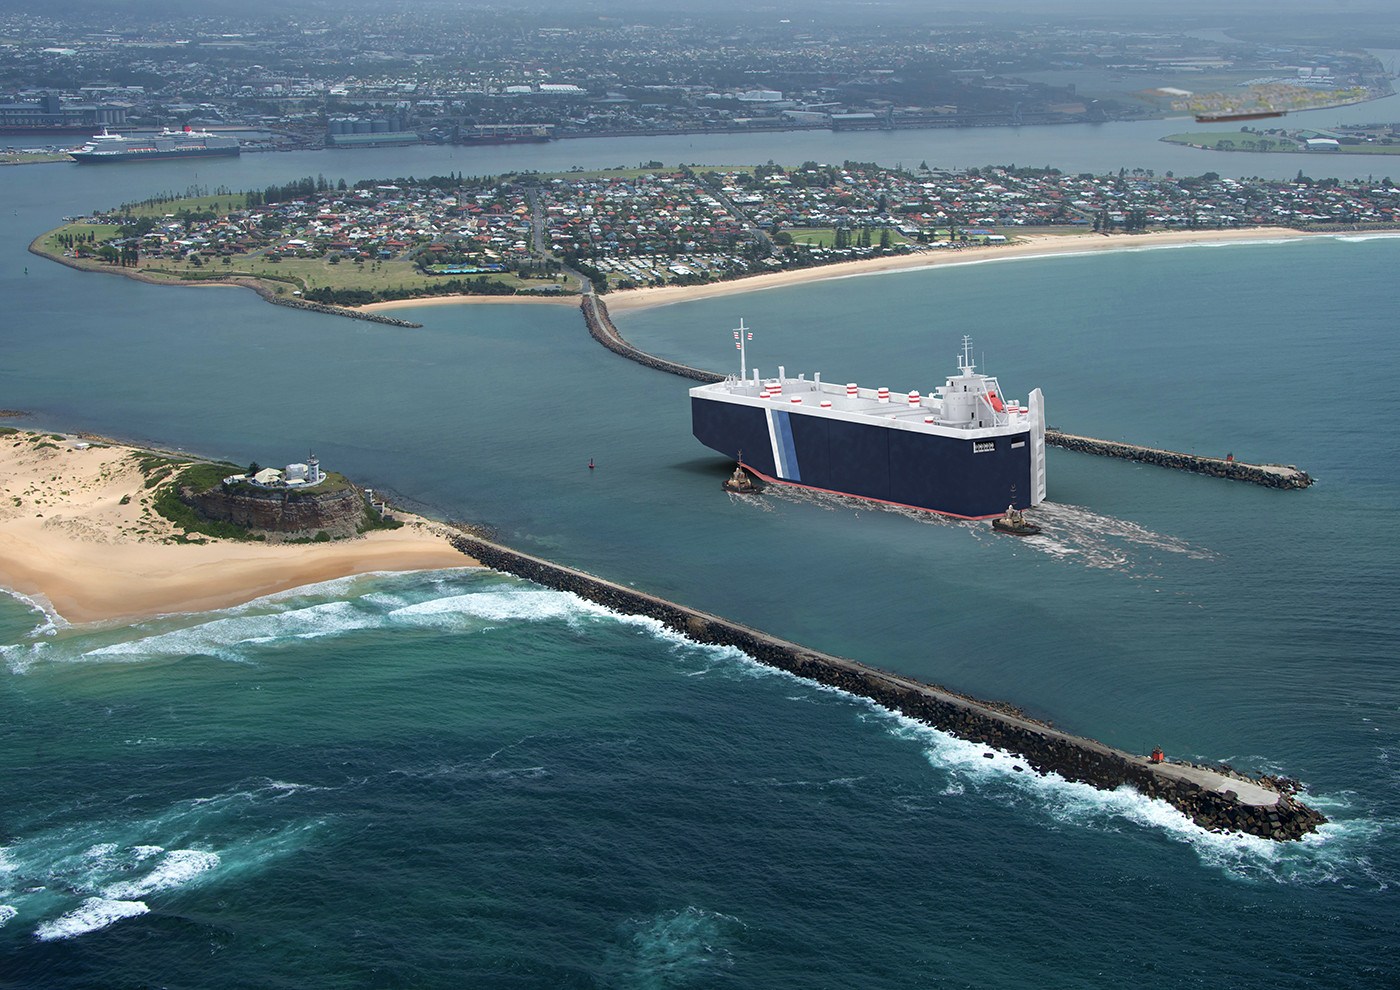 Newcastle Port to use 100% renewable energy by 2021